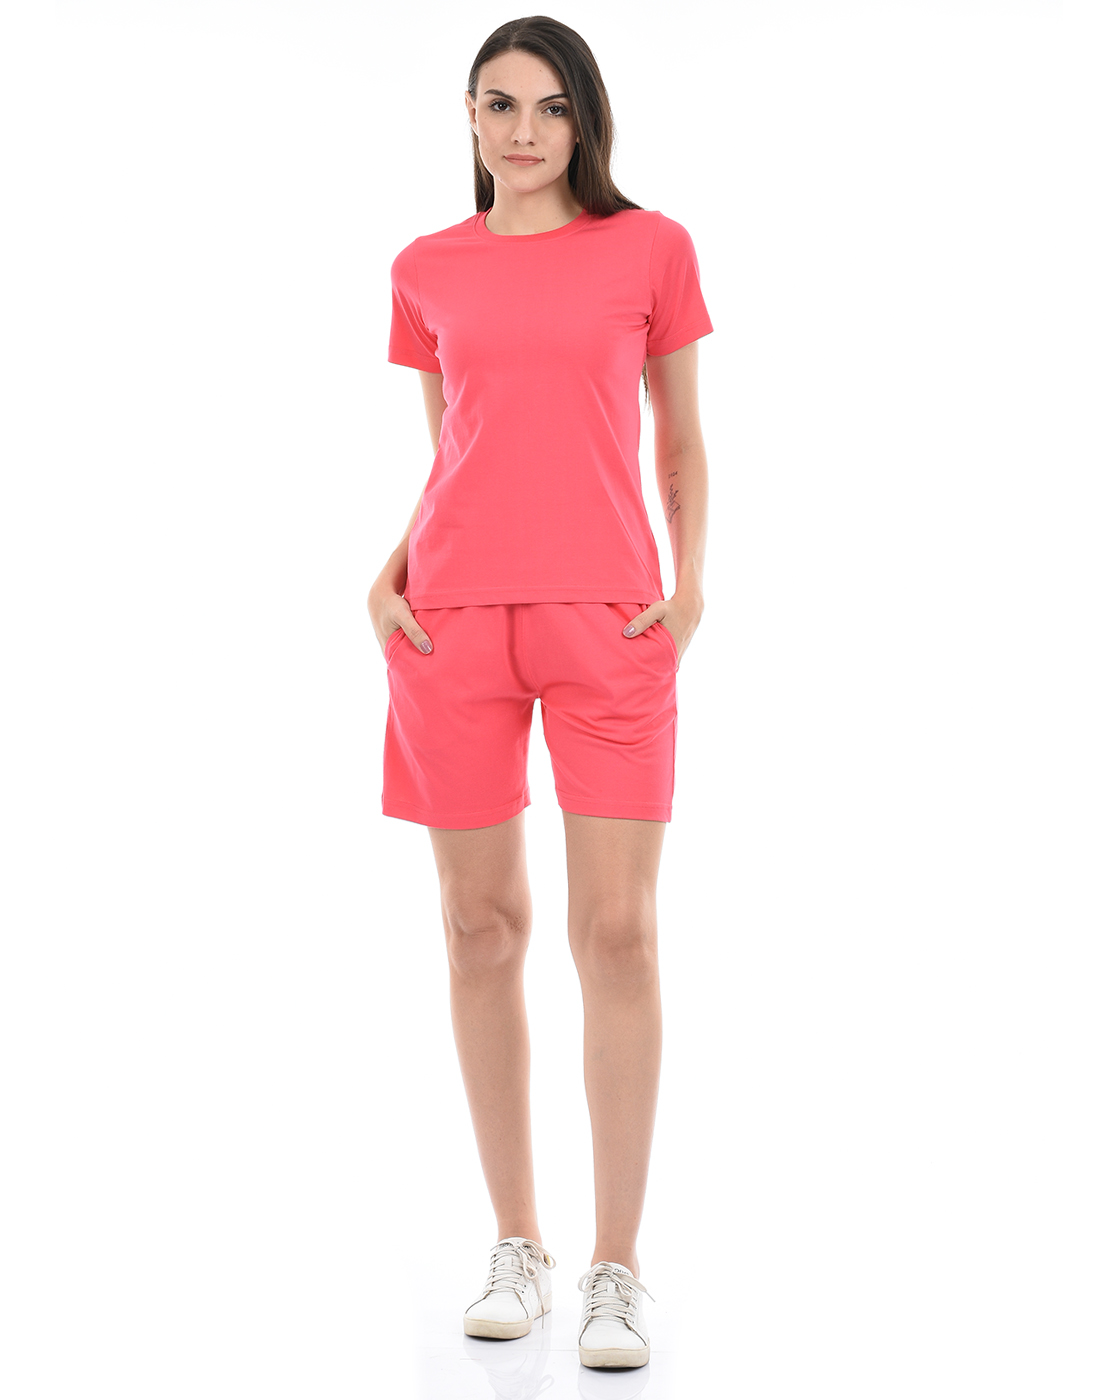 ONEWAY Round Neck Half Sleeves Solid Night Suit with shorts for Women|100% Cotton|Comfort Fit|Night Wear|Women's Comfortable PJ'S